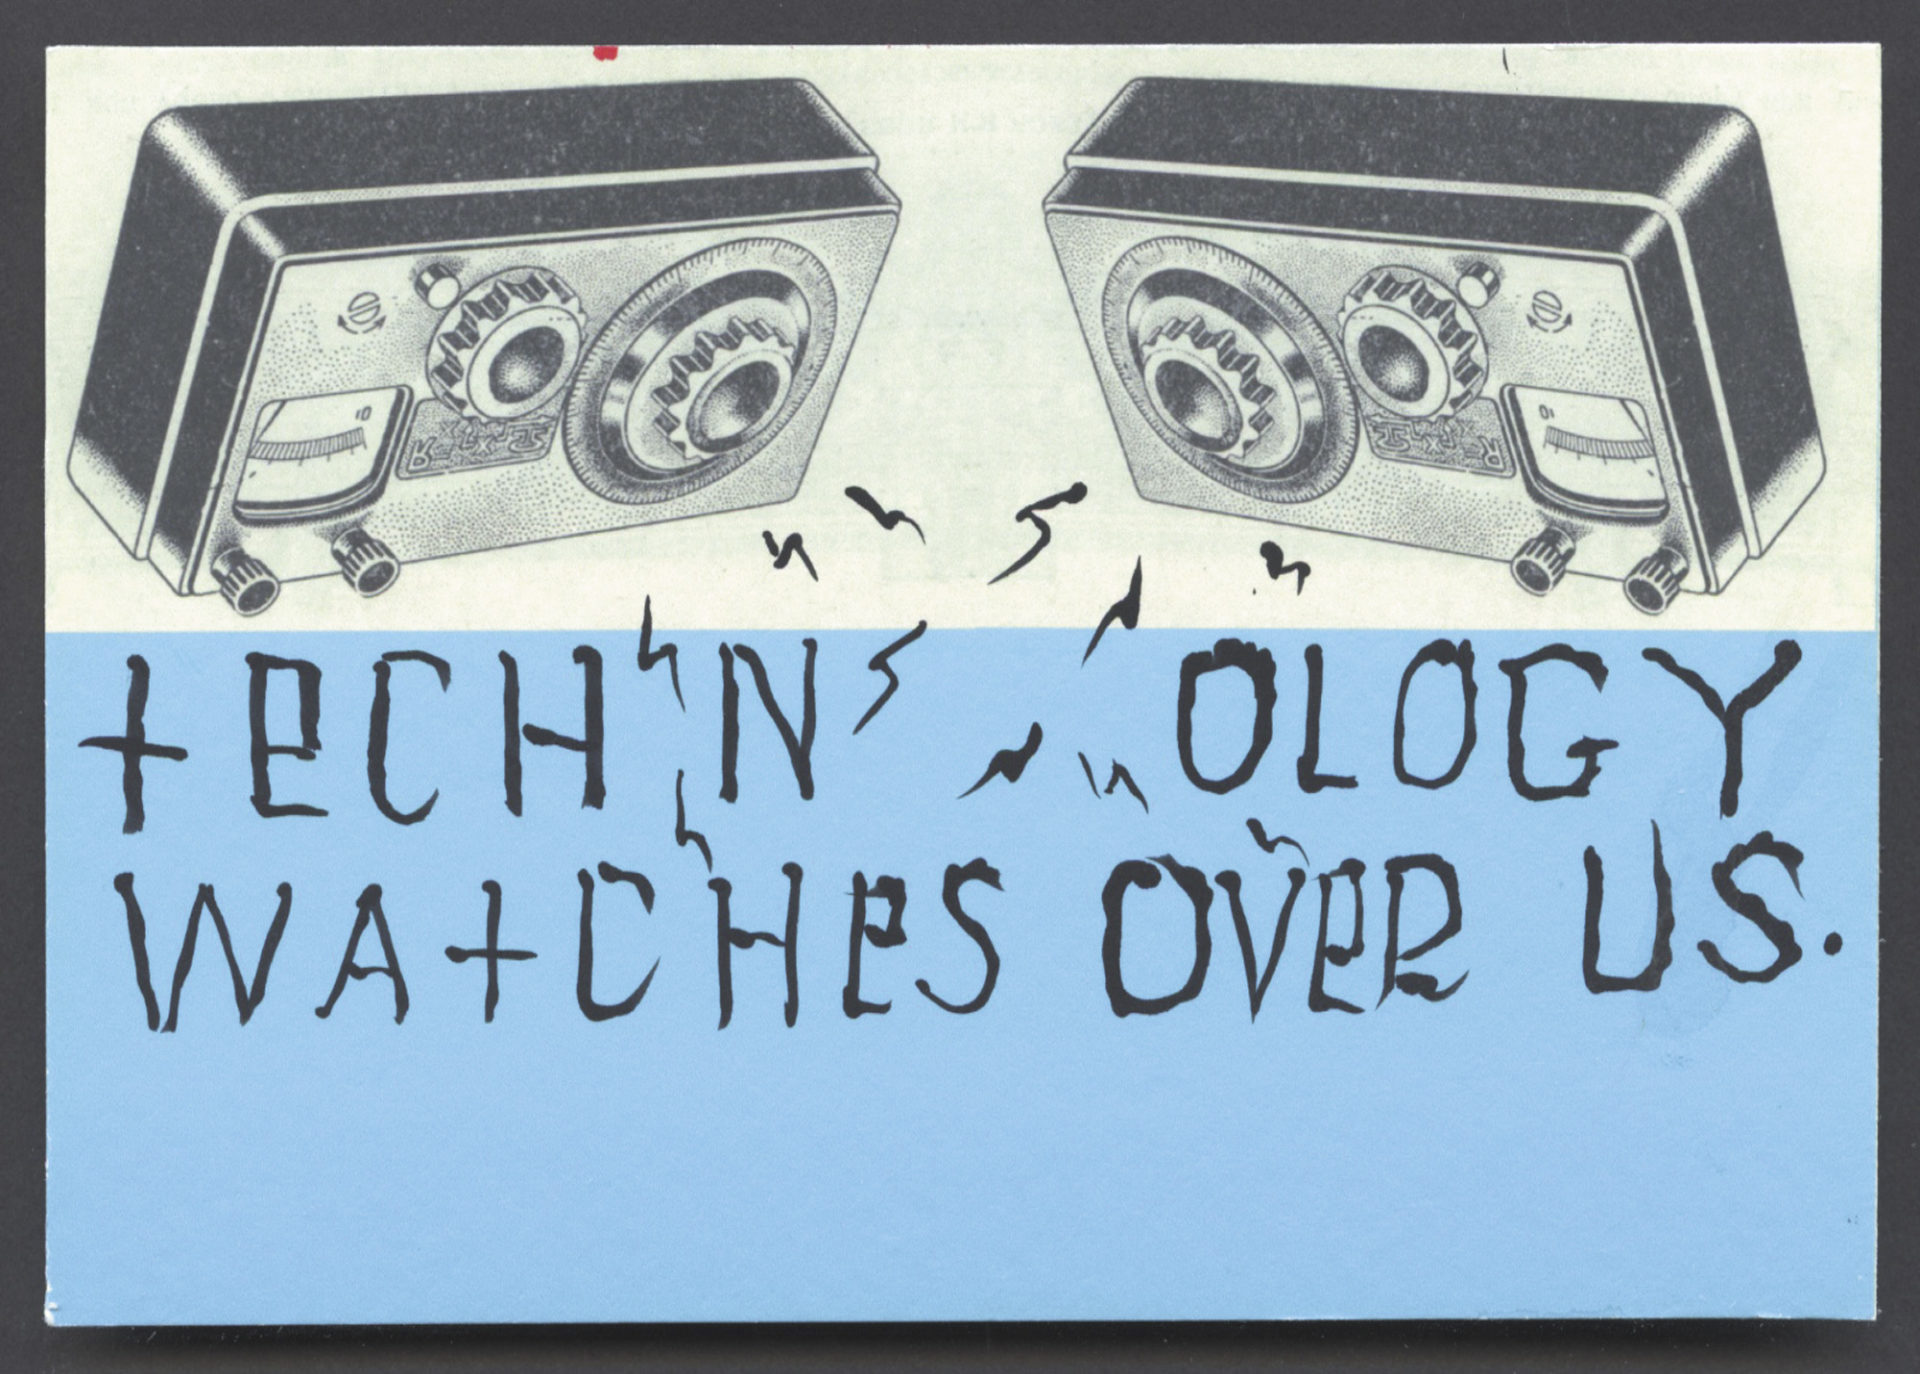 Technology-Watches-Over-Us--by-Mark-Mothersbaugh_Postcards For Democracy by Mark Mothersbaugh & Beatie Wolfe